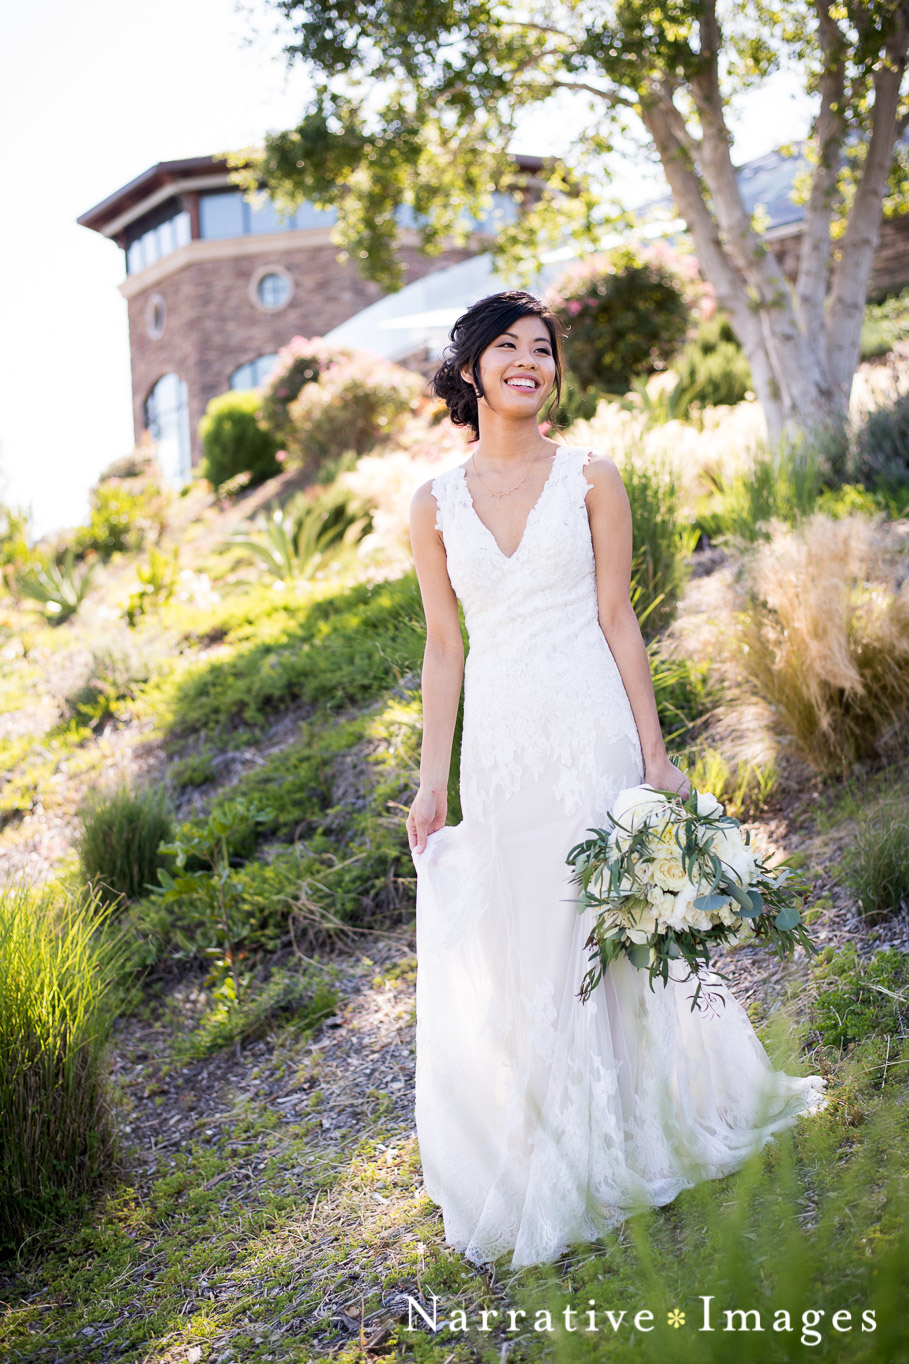 Bride in wedding dress holding natural bouquet and smiling at the crossings